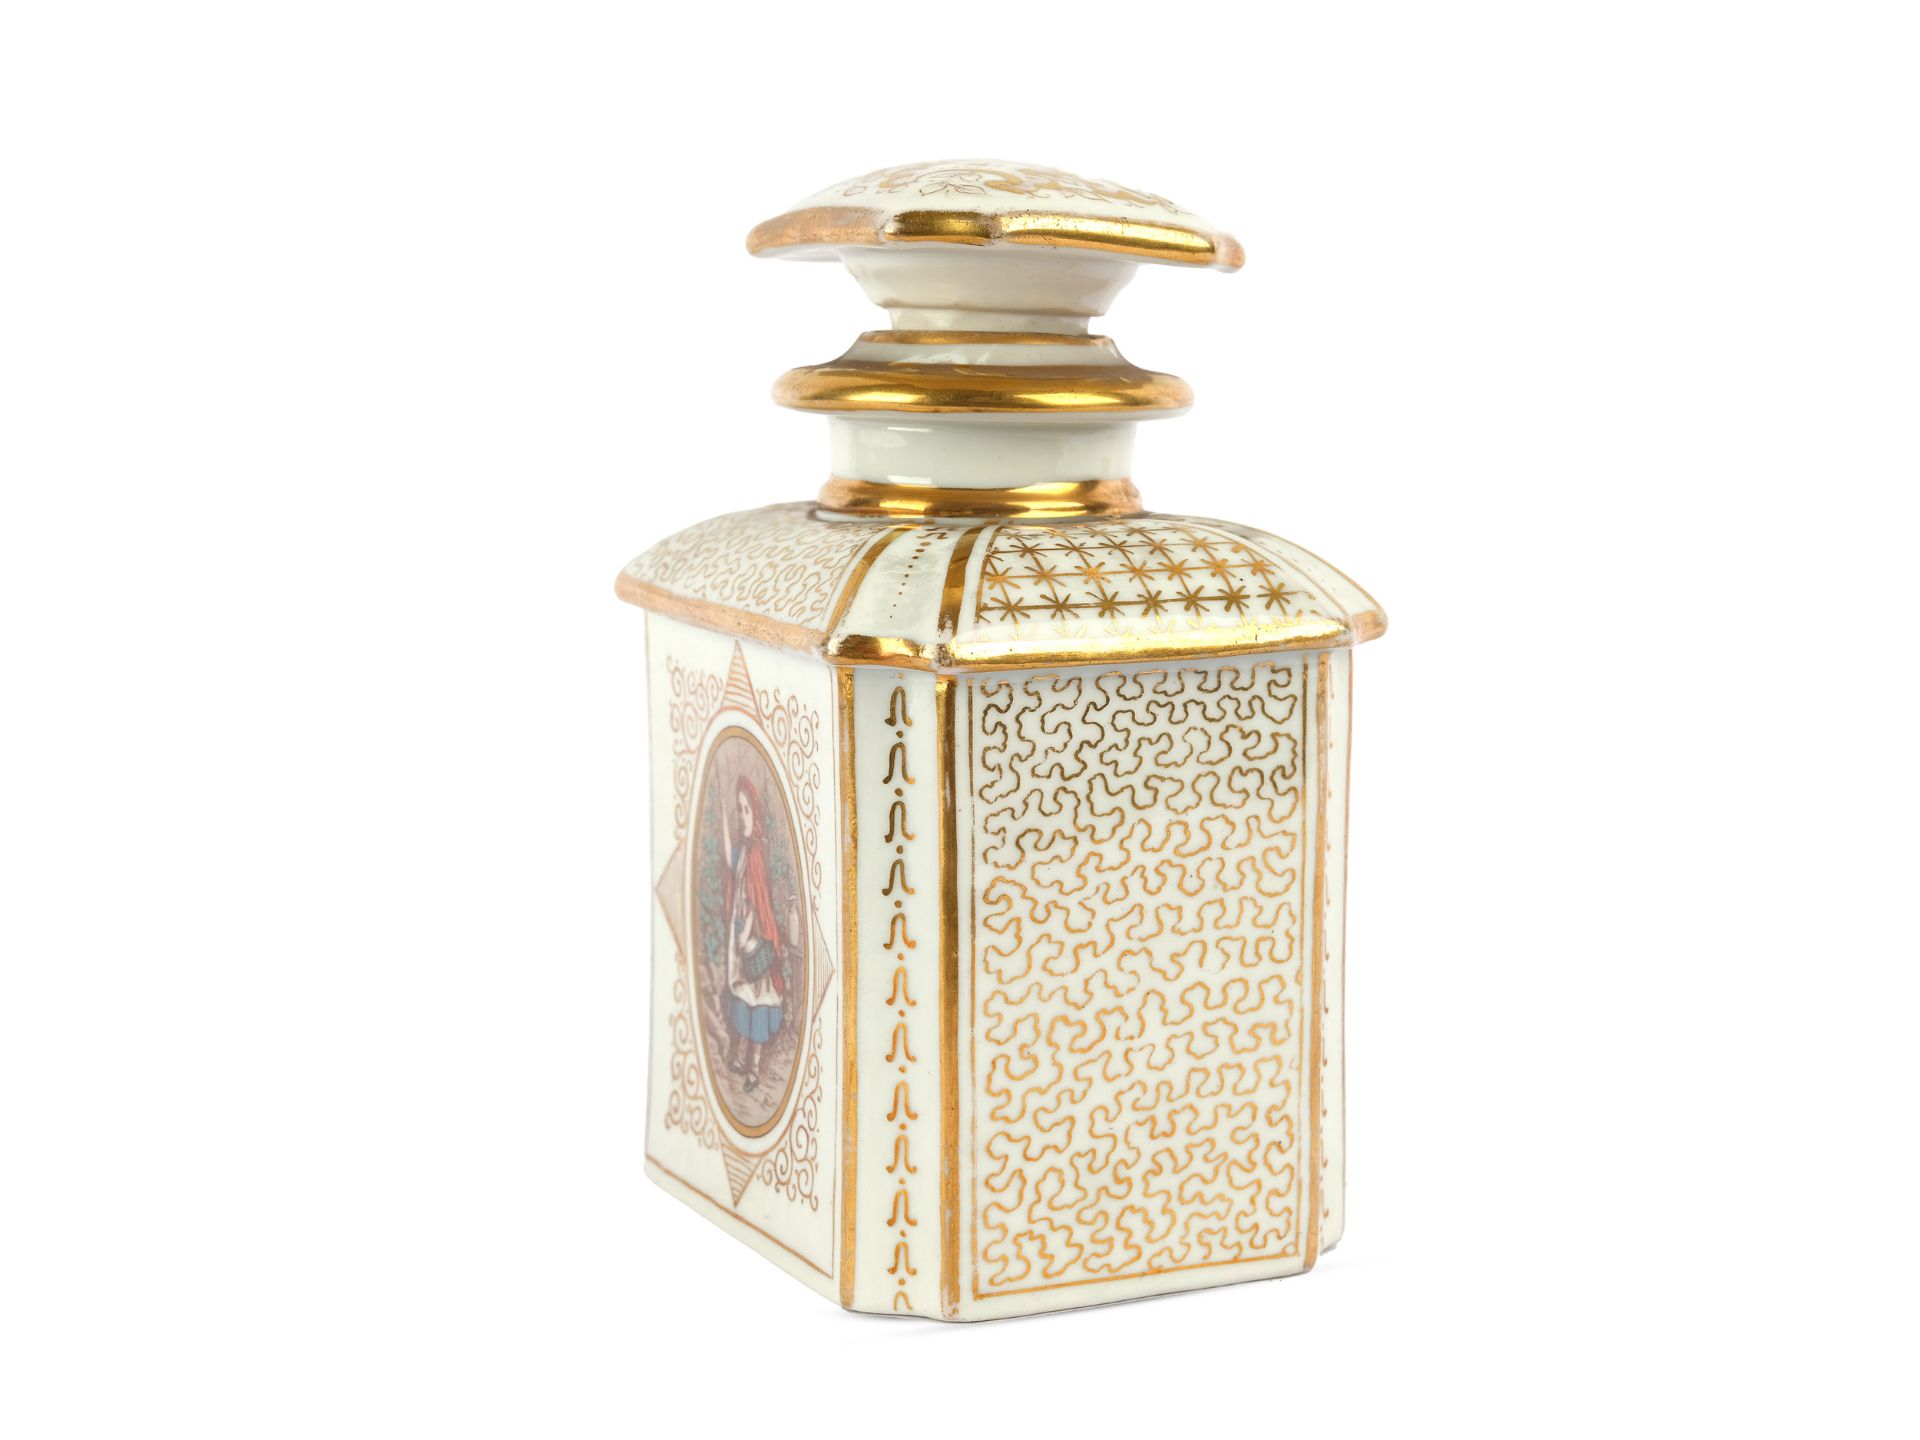 Tea caddy, Around 1900, White porcelain gold-painted - Image 3 of 4